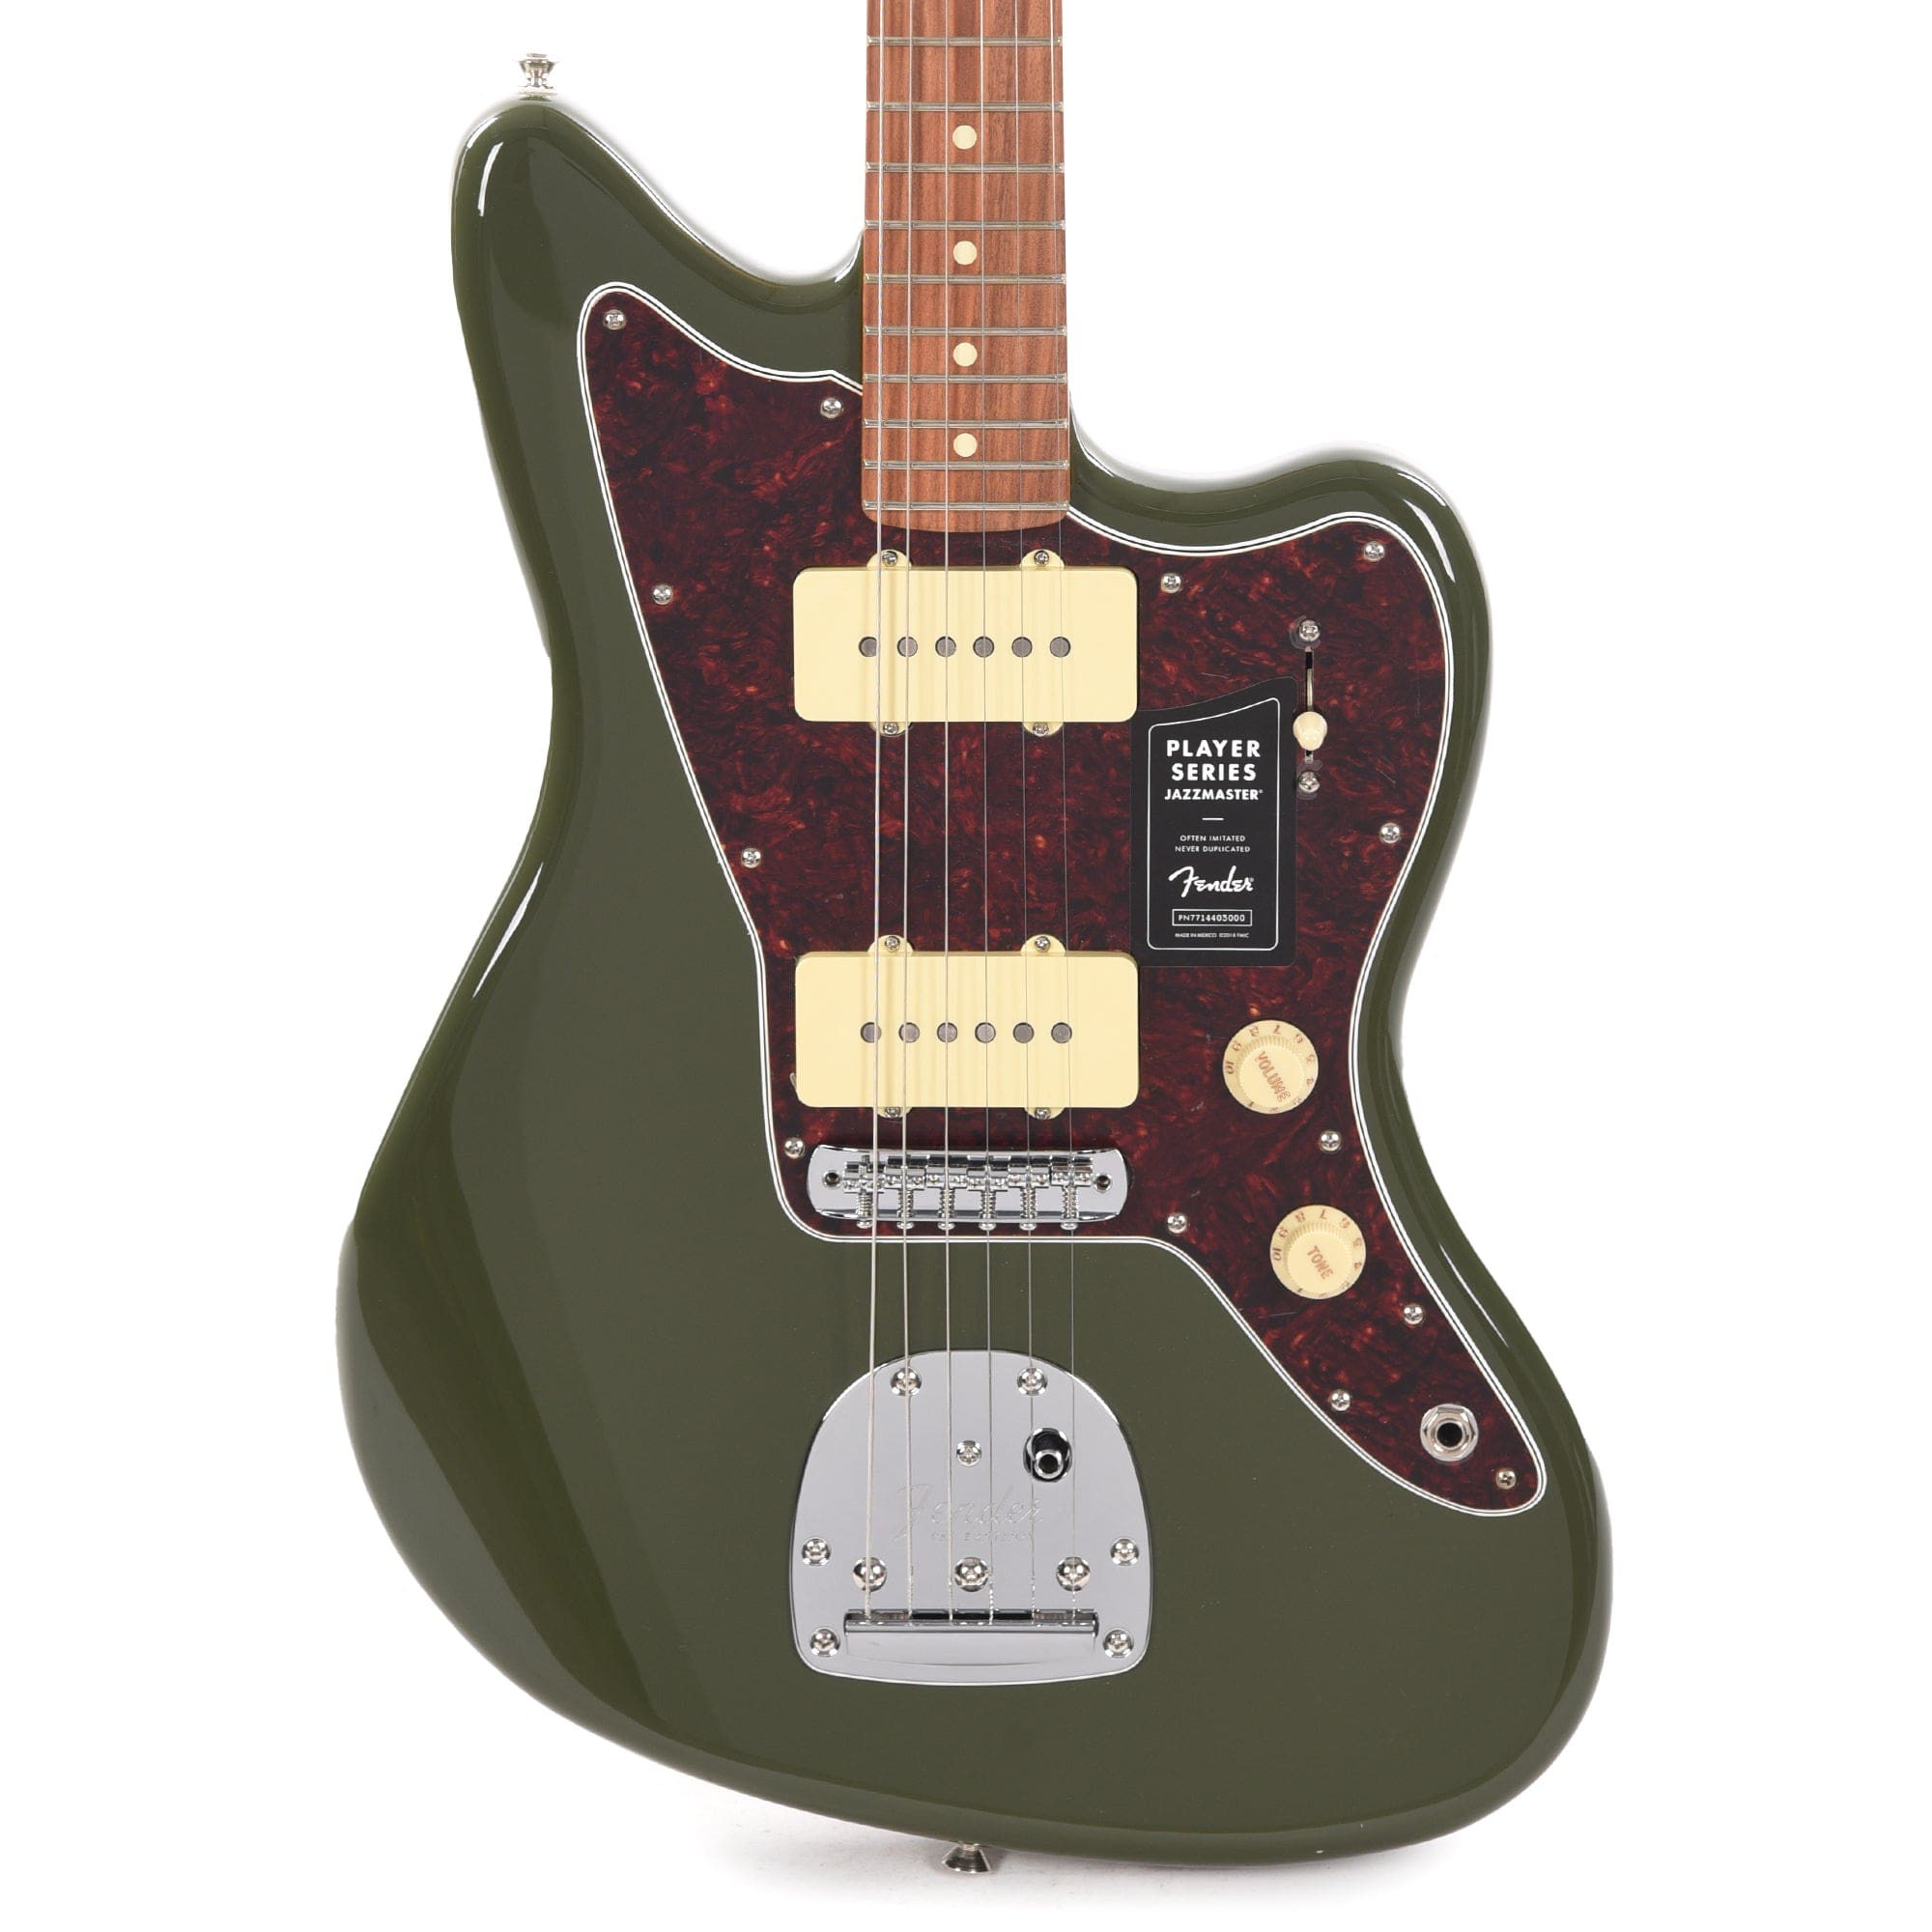 Fender Player Jazzmaster Olive w/Matching Headcap, Pure Vintage '65 Pickups, & Series/Parallel 4-Way Electric Guitars / Solid Body